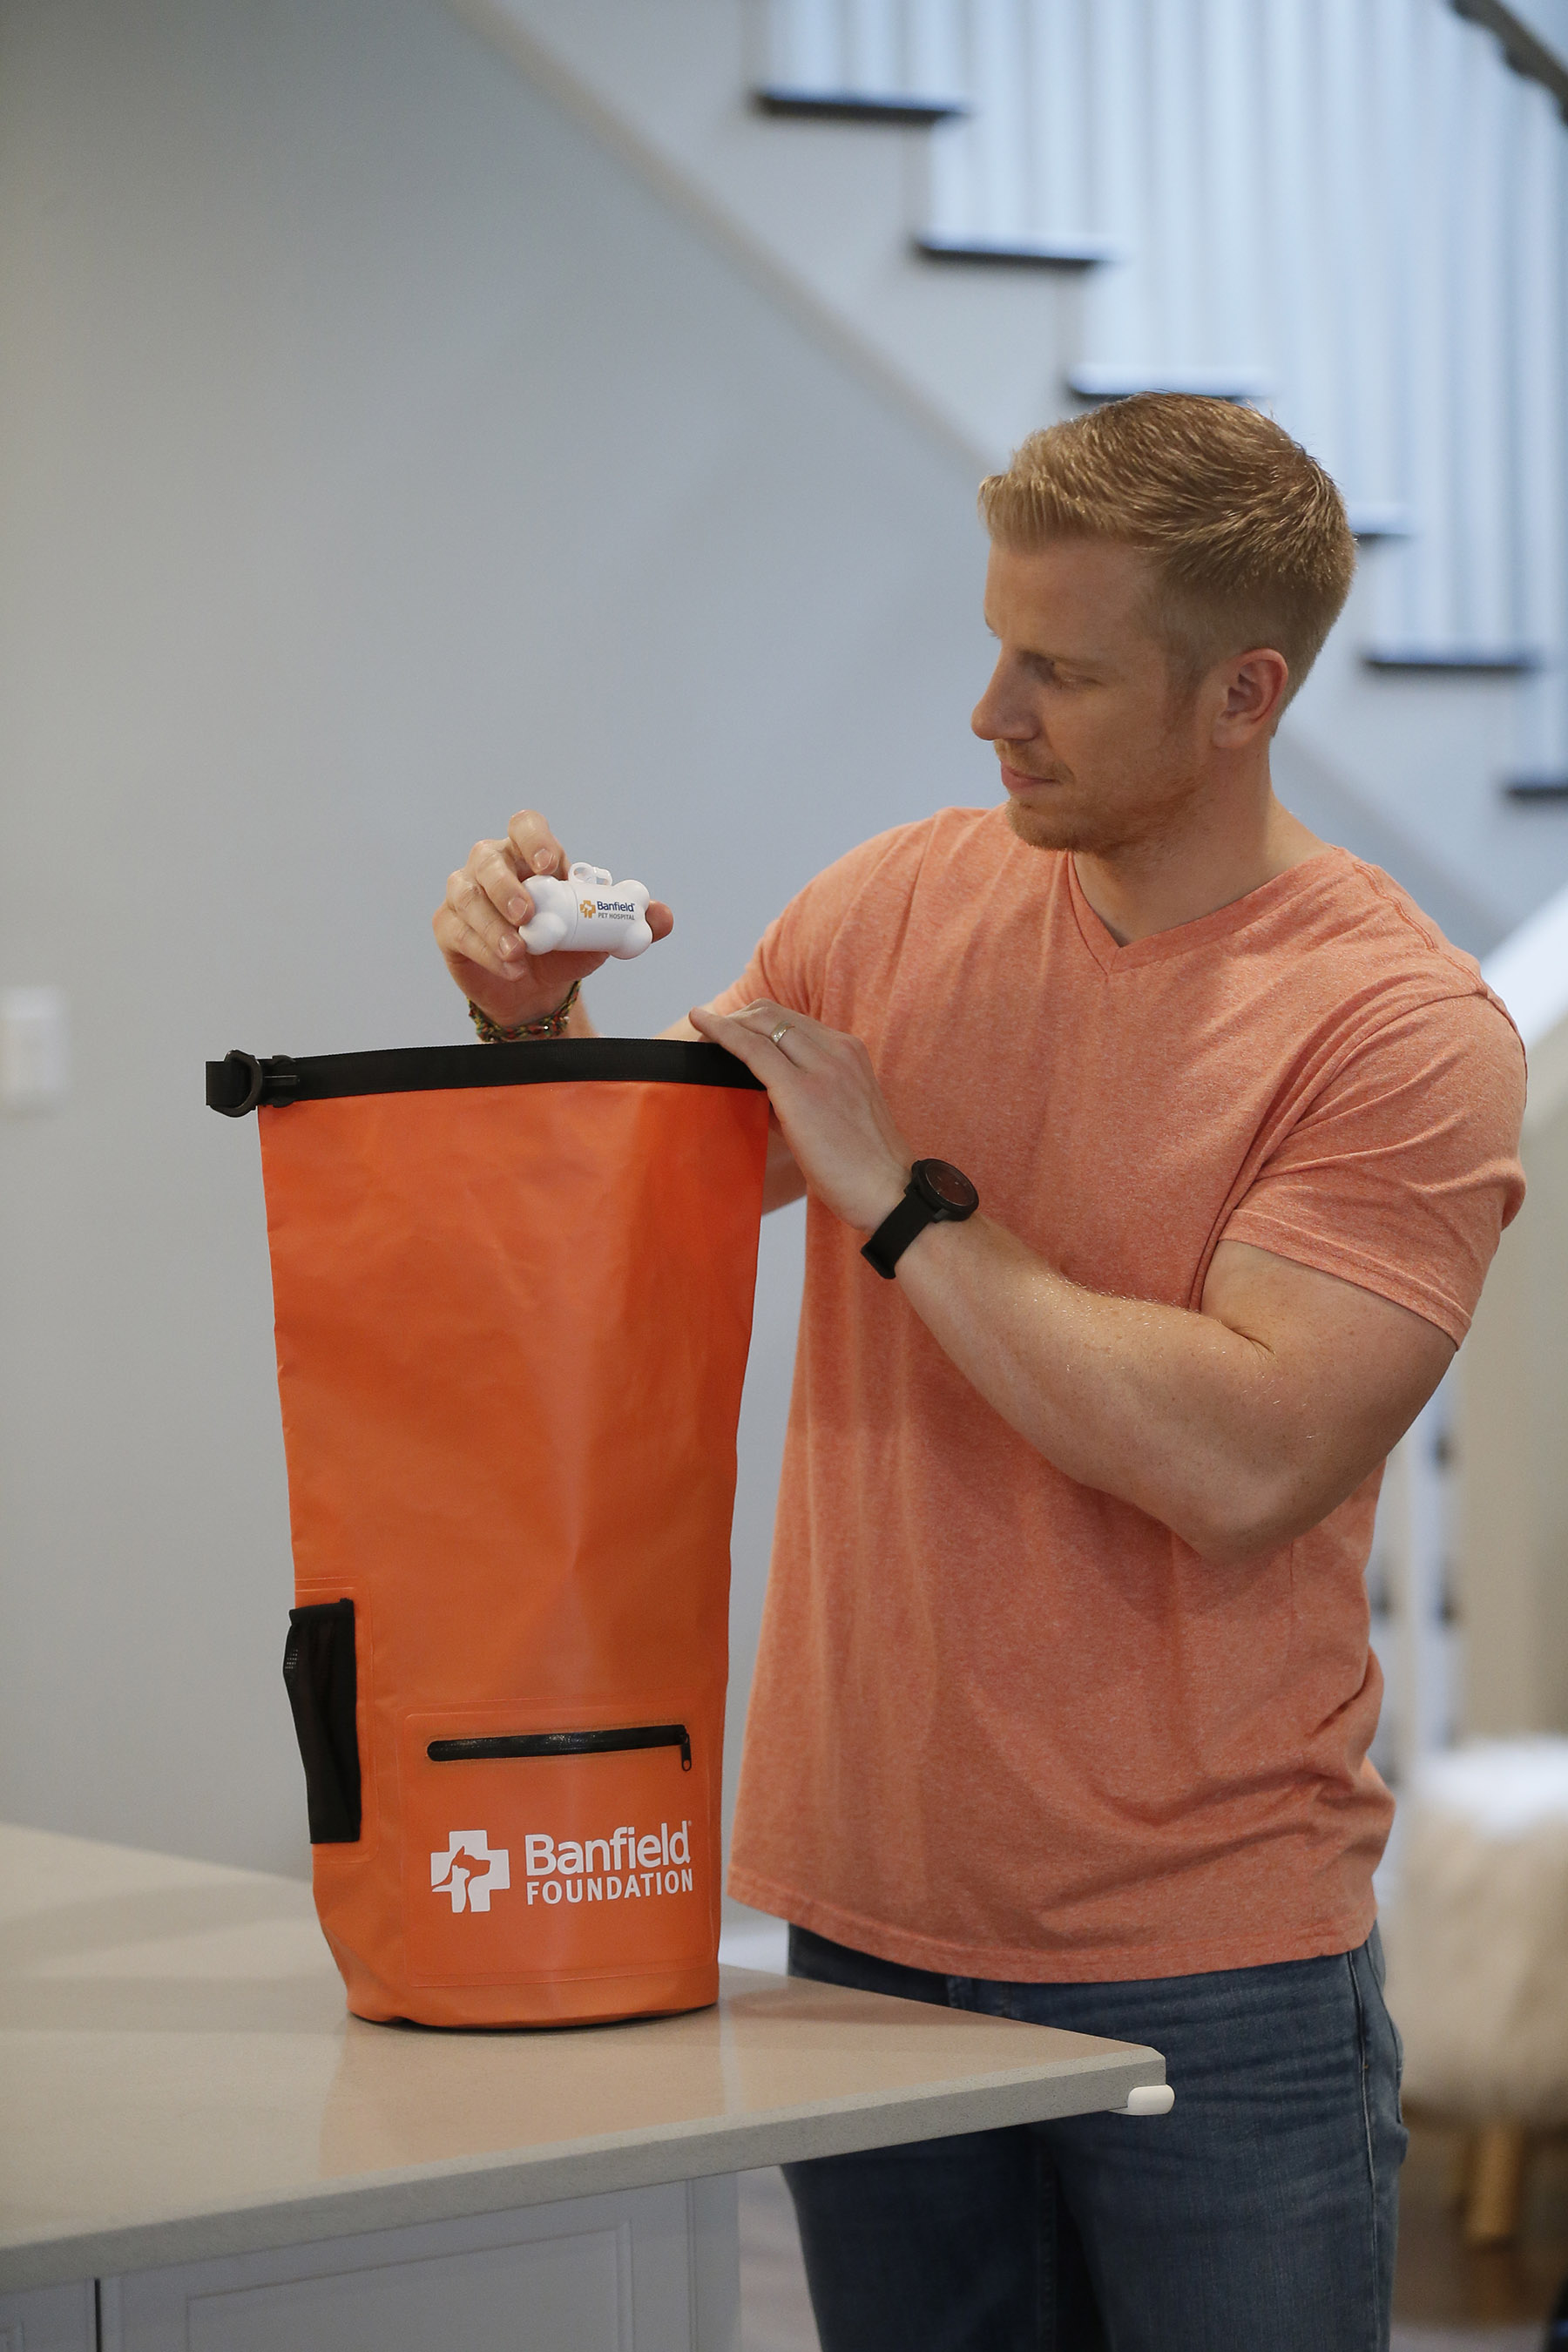 TV personality Sean Lowe packs his pet disaster preparedness kit while filming a PSA with the Banfield Foundation at his home in Dallas, Texas. The waterproof kit contains critical supplies such as a blanket, treats, stress-relief products, water and food calculation charts, tips and checklists to help keep pets cared for in the event of a natural disaster. The PSA debuted nationally on June 6, 2018. (Photo credit: Brandon Wade/AP Images for the Banfield Foundation)